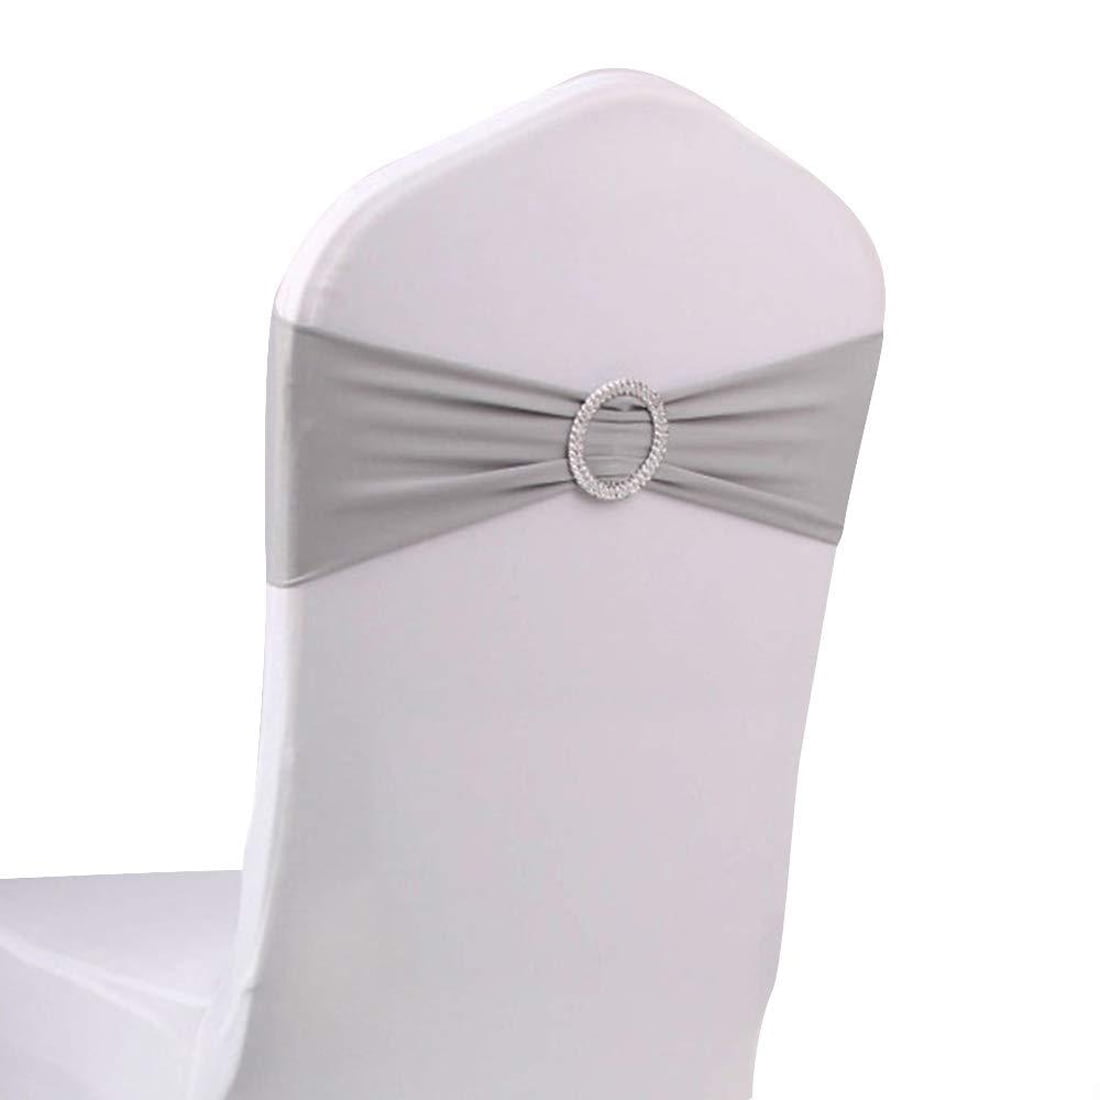 10pcs Lycra Spandex Stretch Chair Band with Buckle for Chair Sash Wedding Chair 